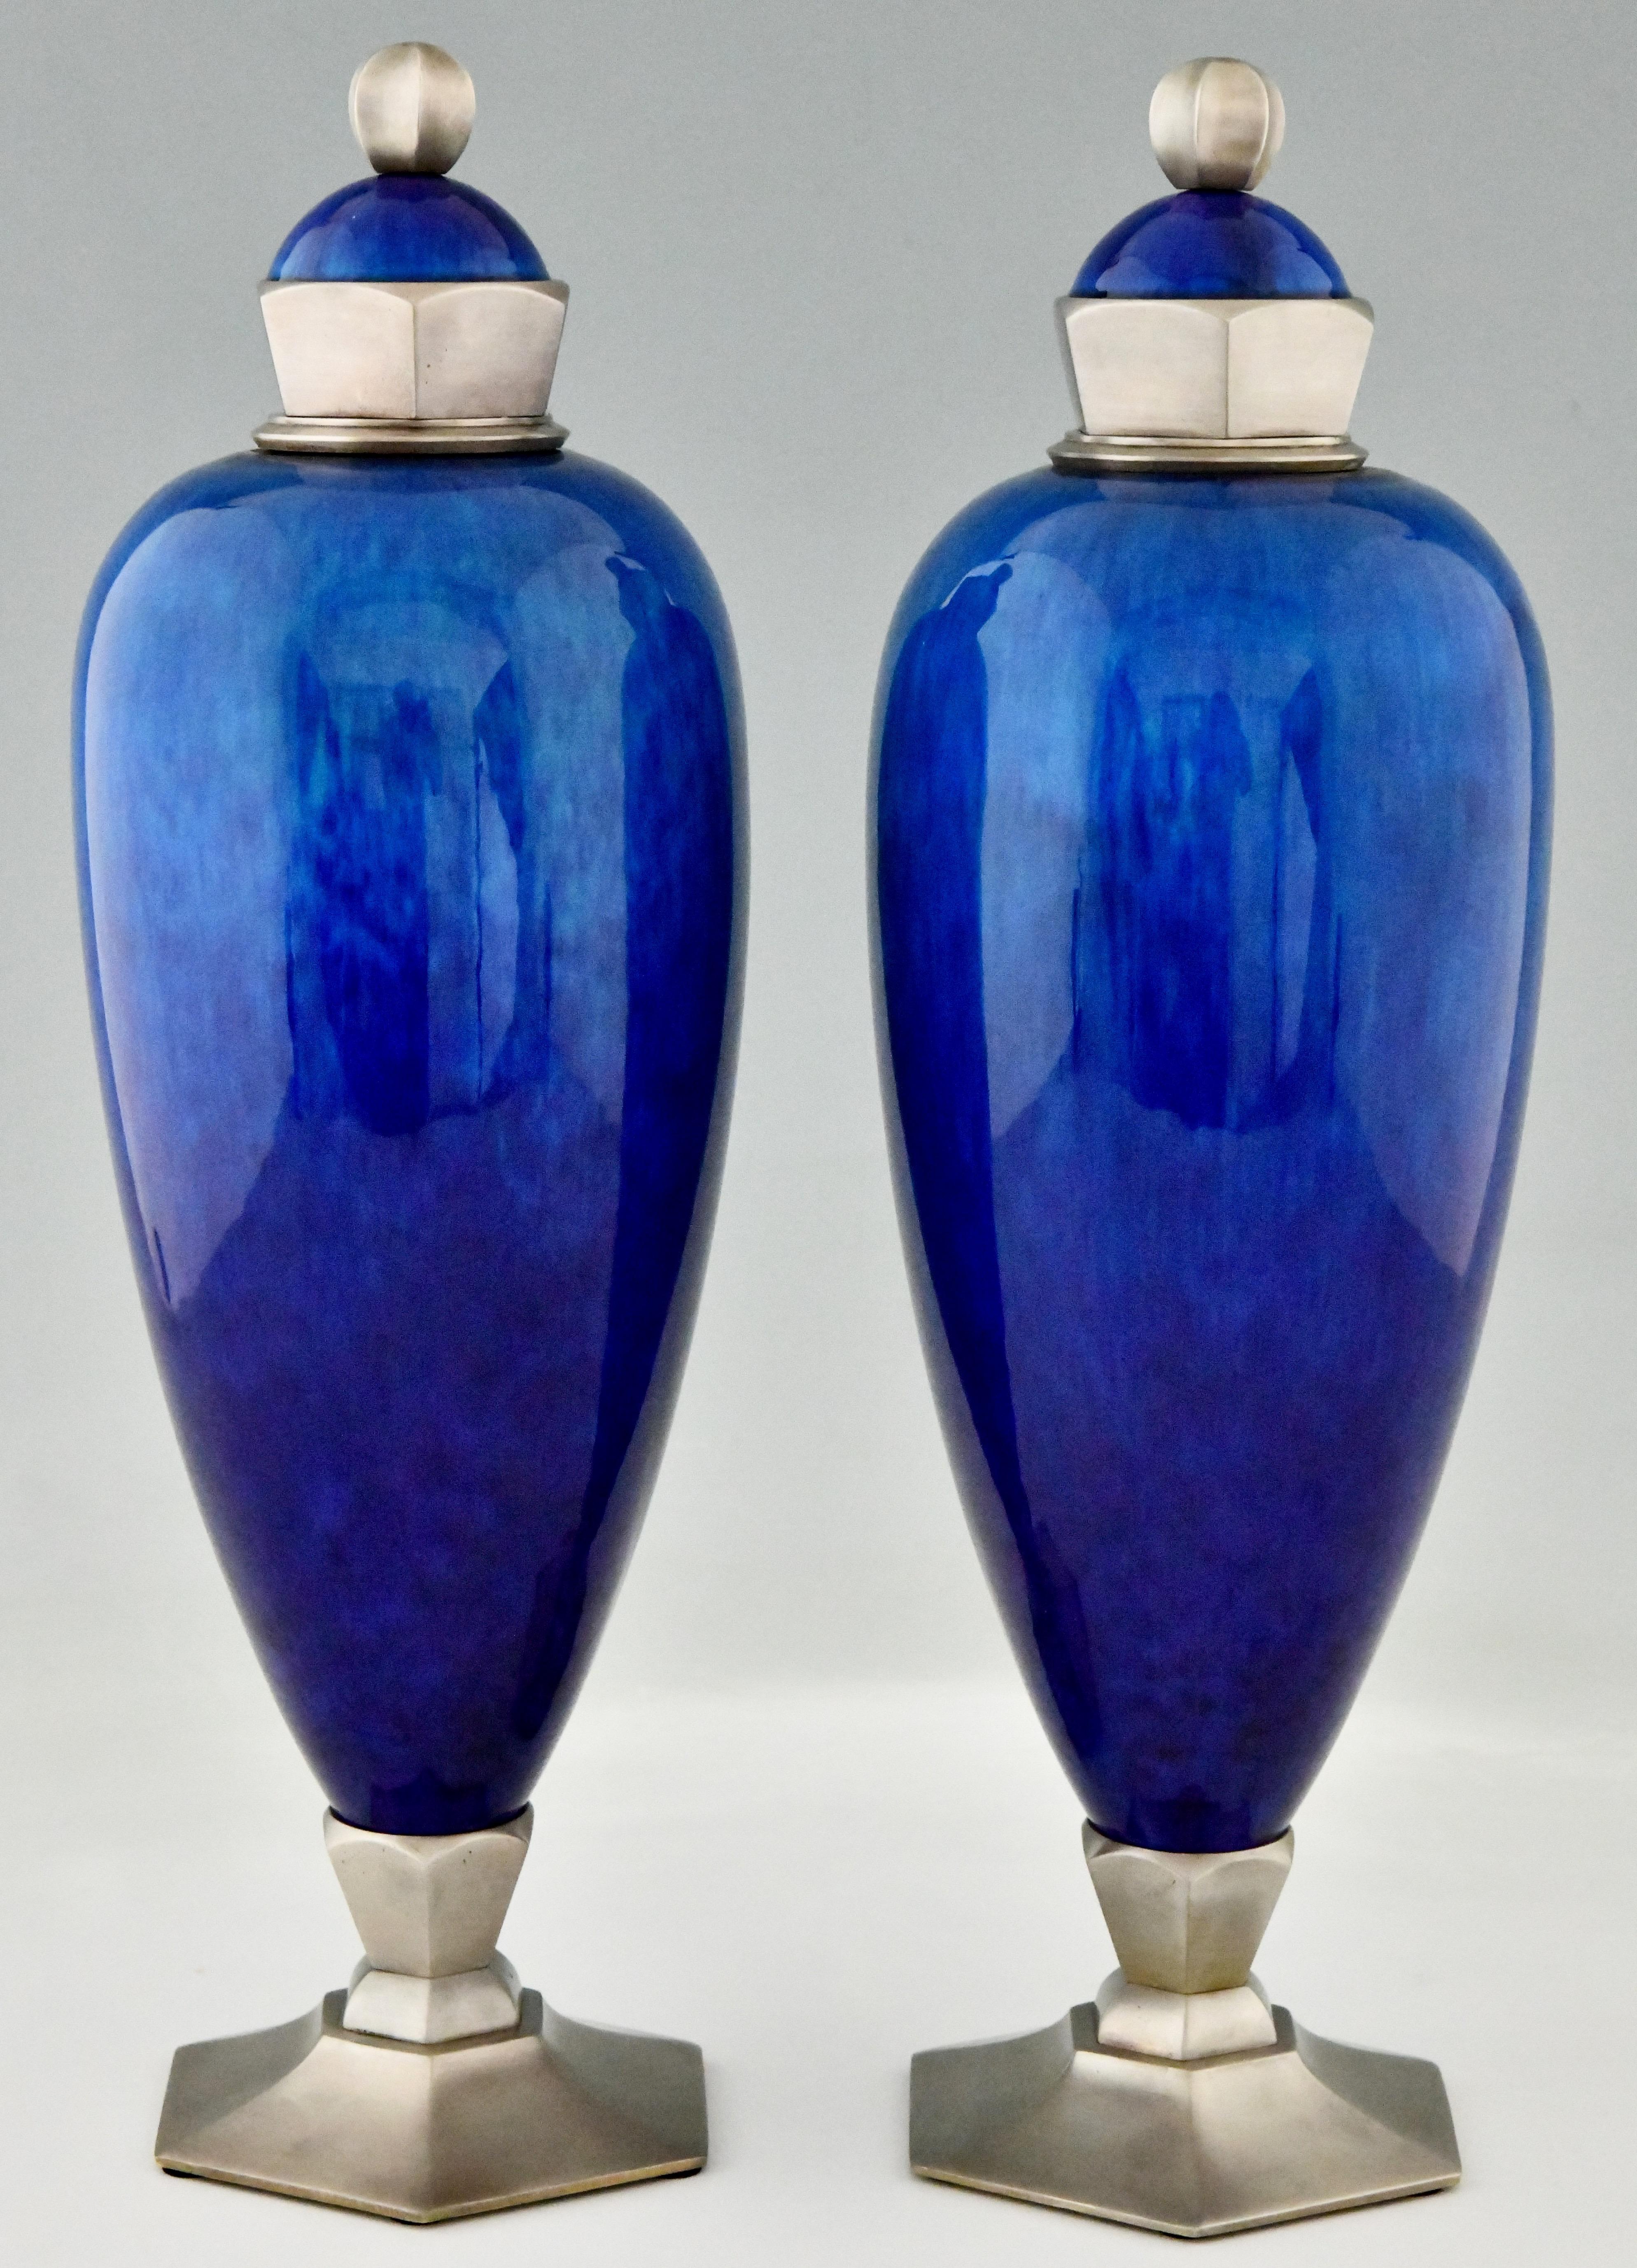 Elegant pair of blue Art Deco ceramic vases or urns by Paul Milet for Sèvres.
The vases have bronze decorations with a silver patina. They are signed with the artists initials and marked Sèvres. Created in France, circa 1925.